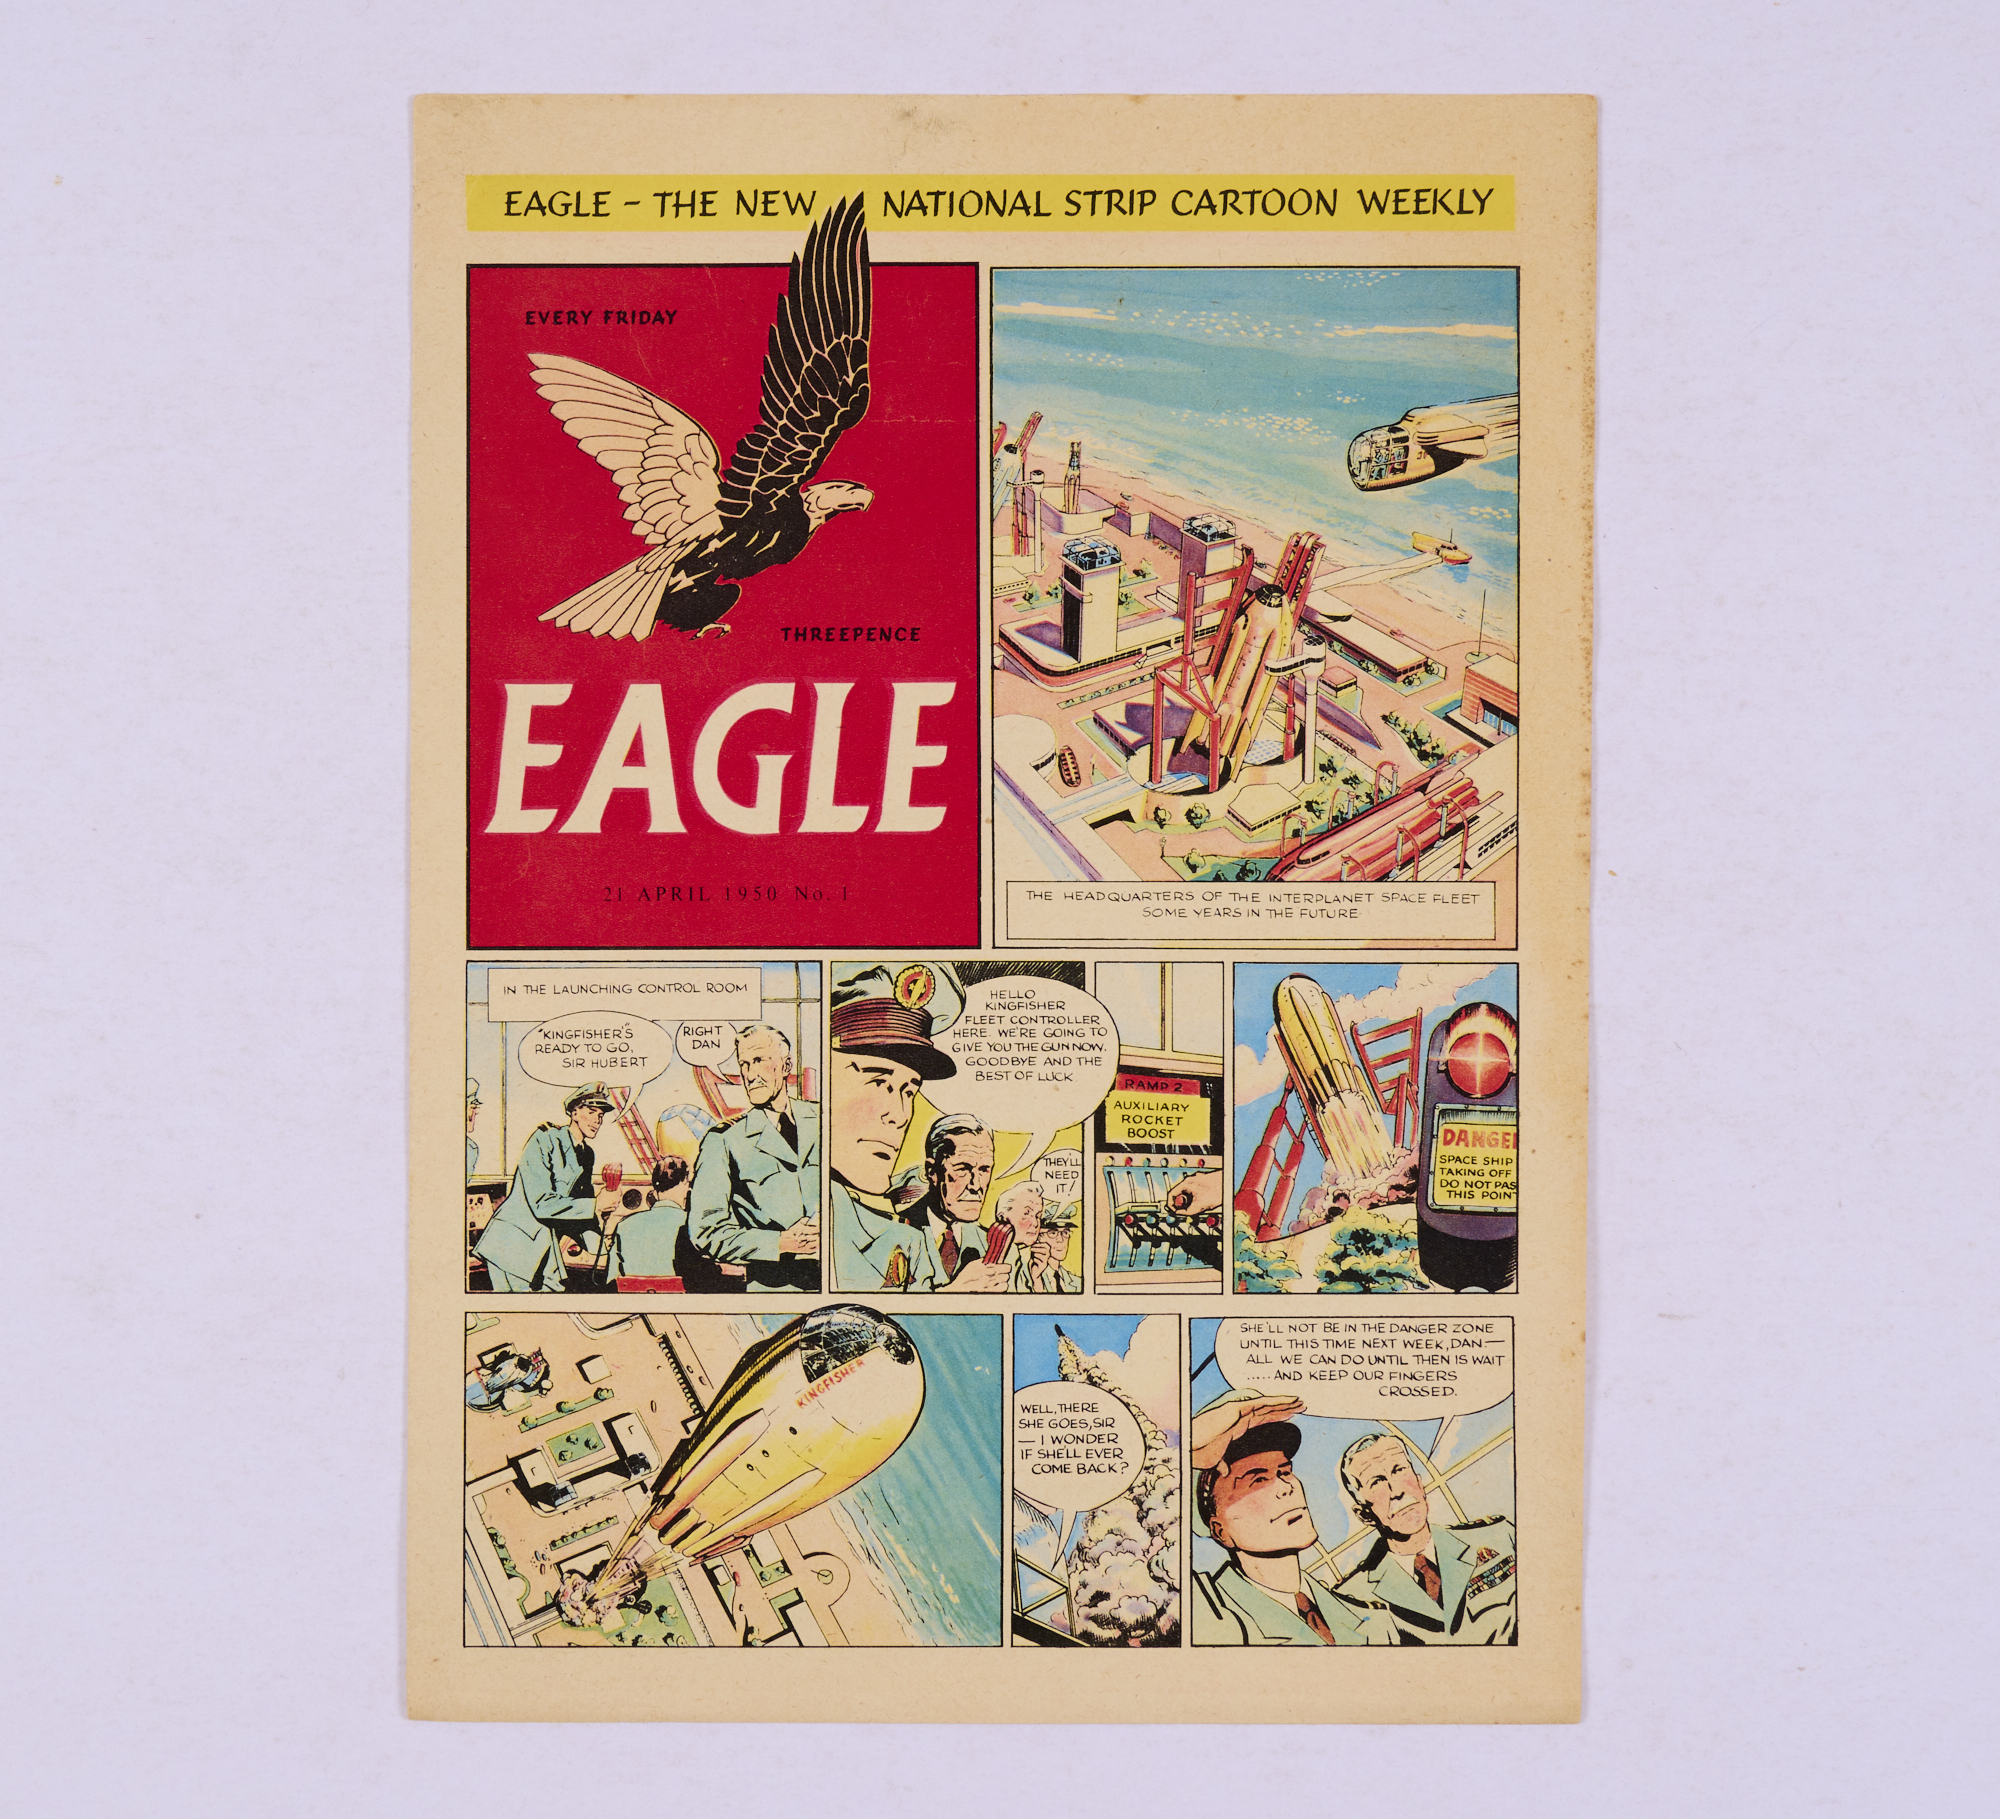 Eagle No 1 promotional eight-page full colour issue distributed to churches and schools in the UK in 1950 to publicise the imminent print run of the first issue of The Eagle. The front cover has no 'Dan Dare Pilot of the Future' header and a different date of 21st April 1950. Bright fresh colours. The back corner has two small lower corner edge pieces missing and some discoloured tape marks. Only a handful of copies are known to exist